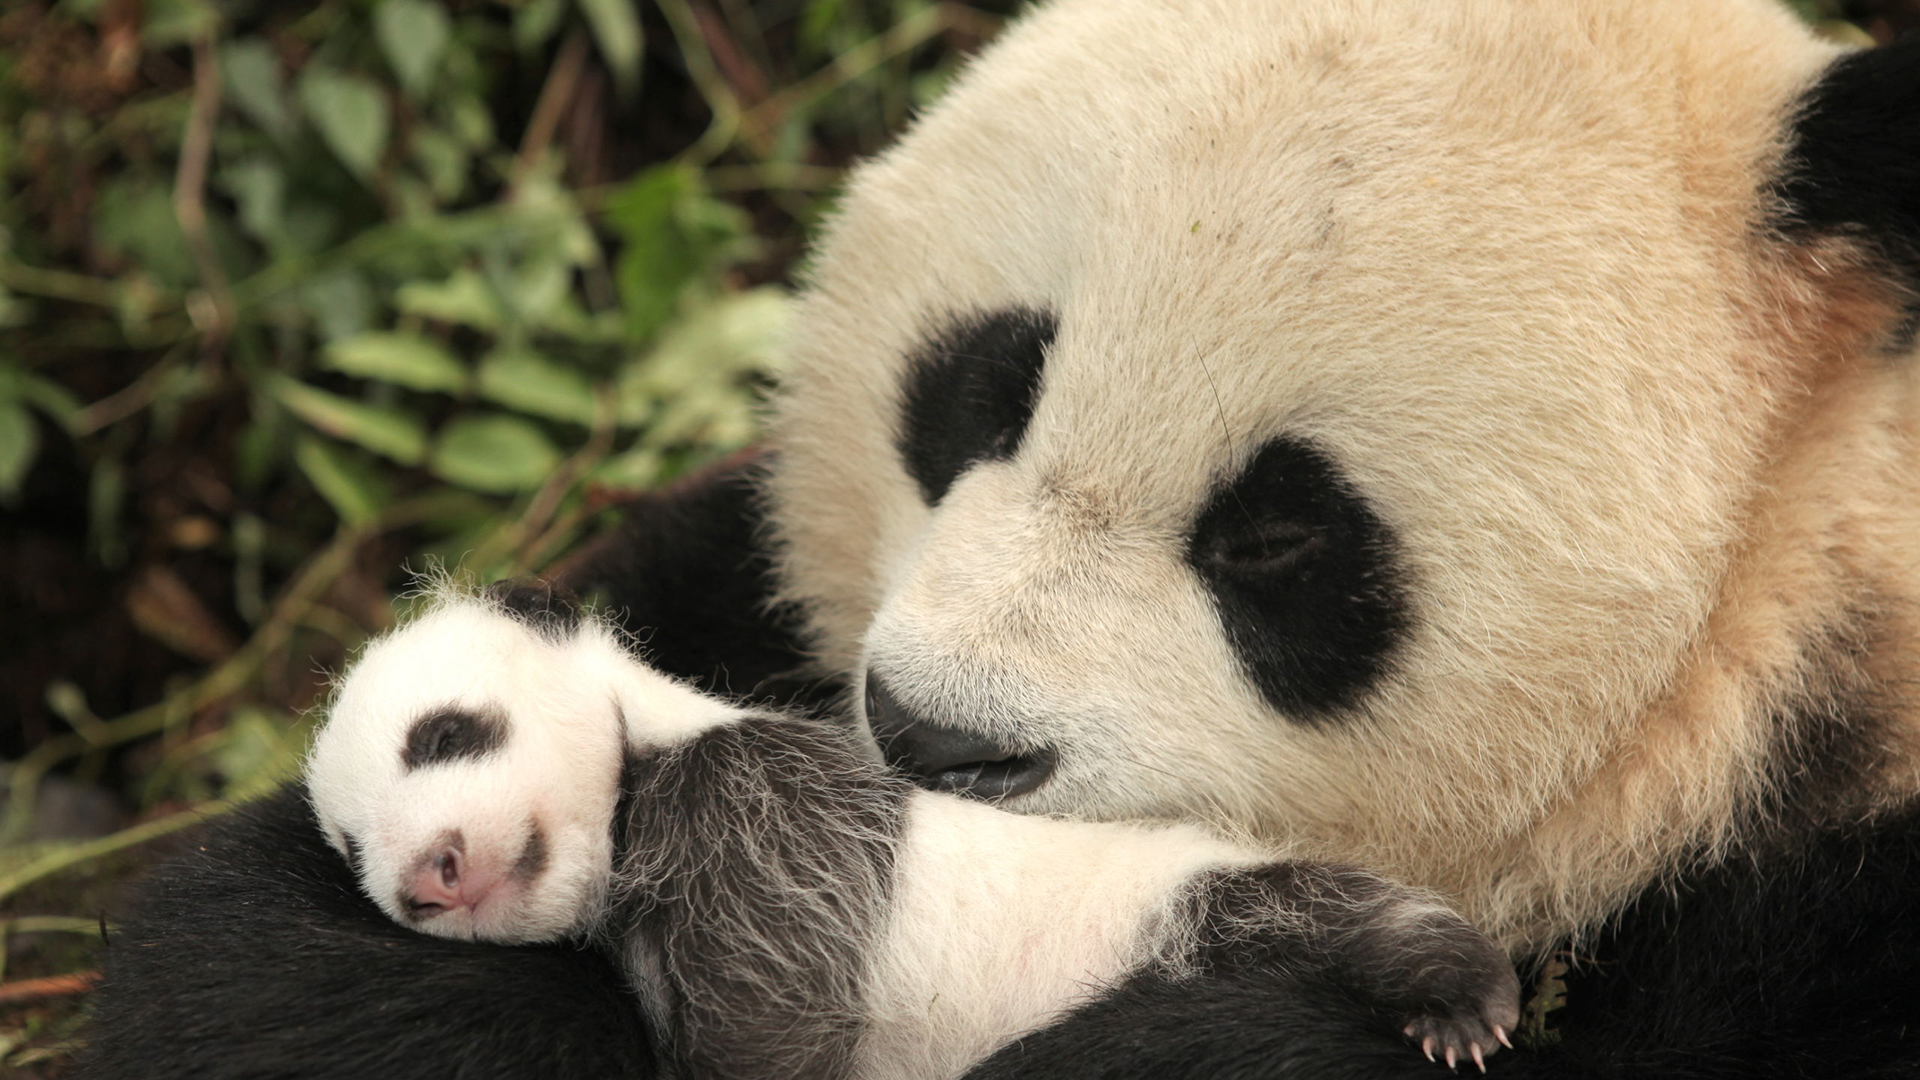 Giant panda mother and her one-month-old cub.